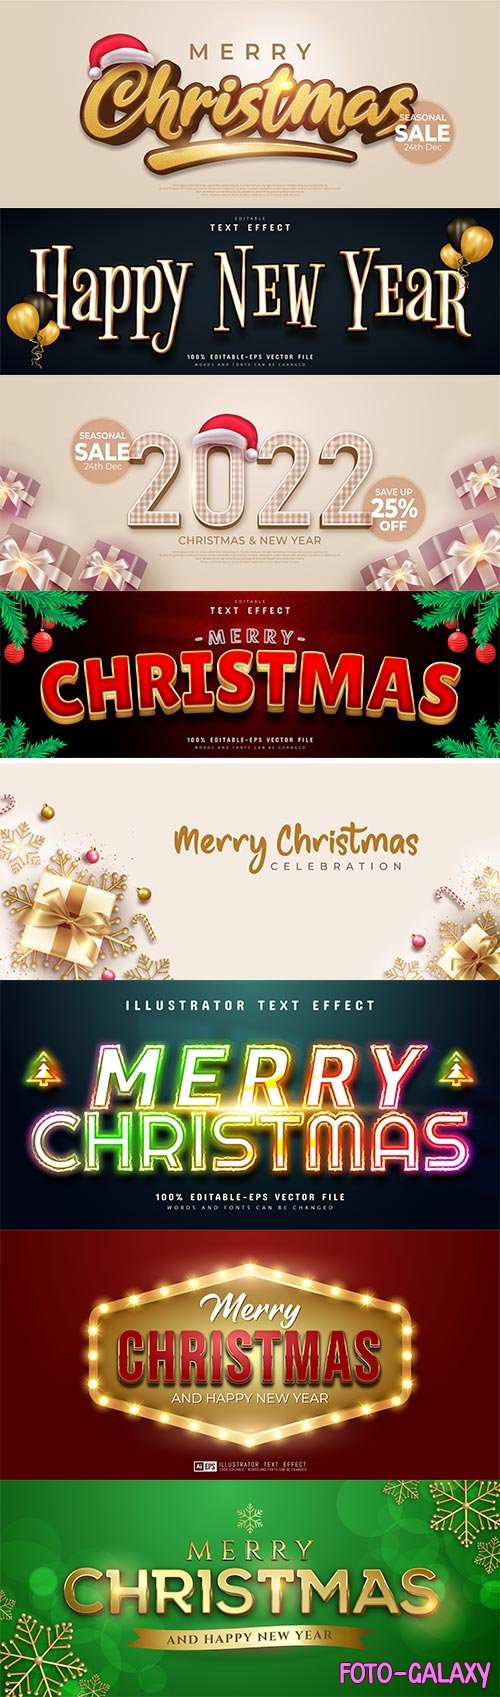 Merry christmas banner with golden christmas element decoration premium vector